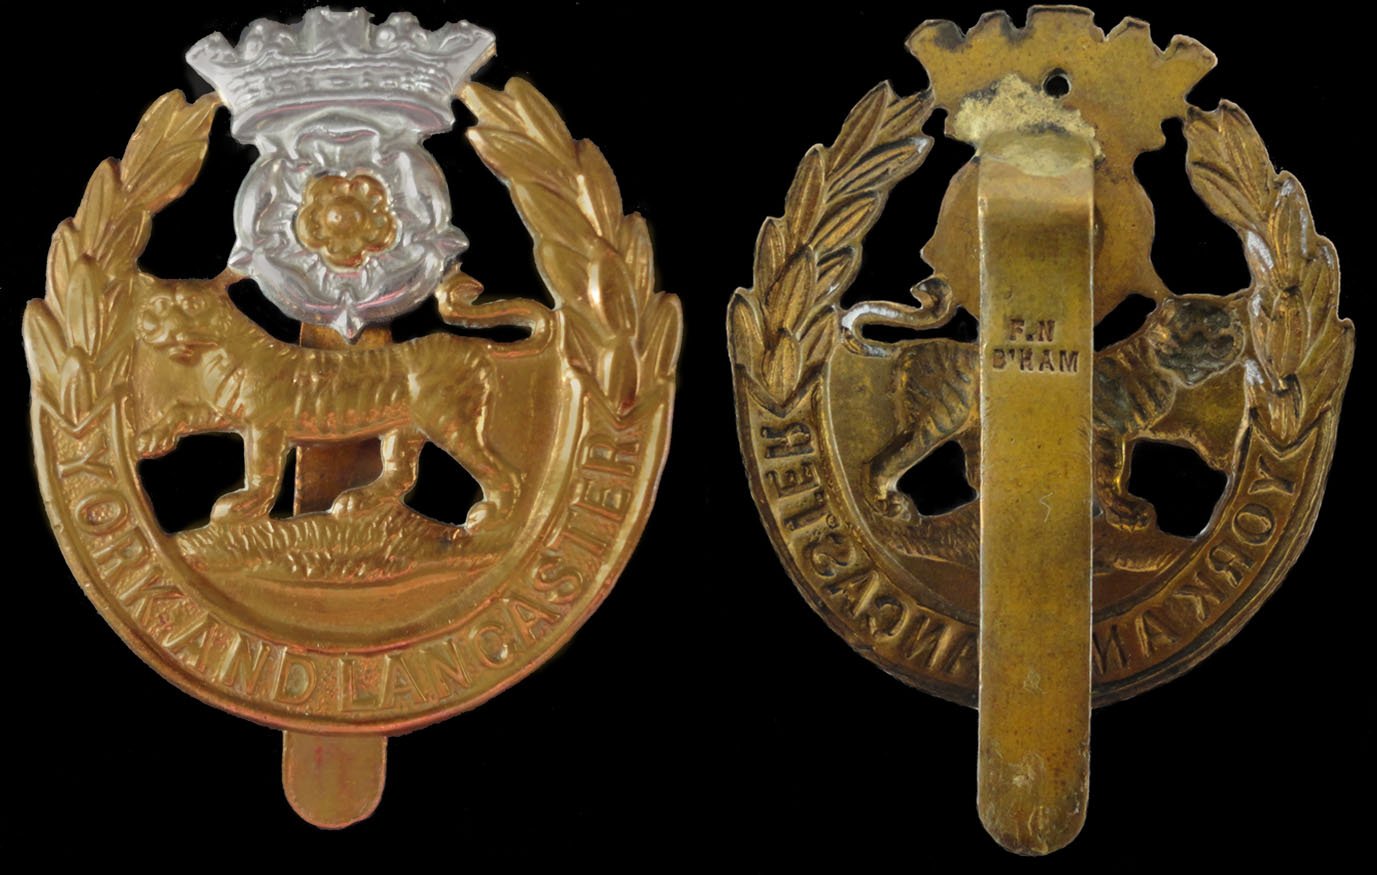 FN Marked Other Ranks Badge 1914 to 1919